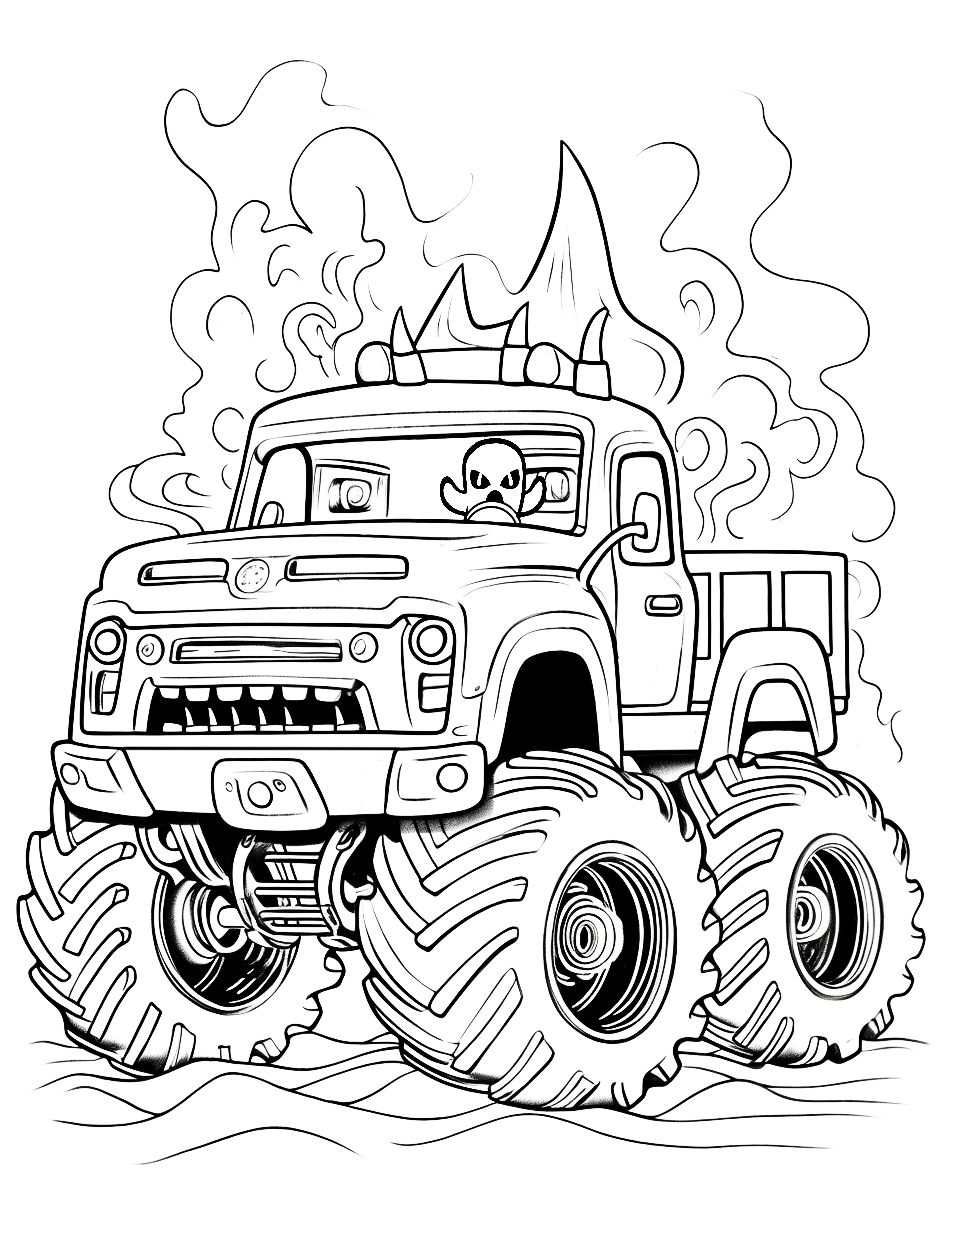 Ghost's Monster Truck Coloring Page - A monster truck with the ghost driver sitting in the driver’s seat.